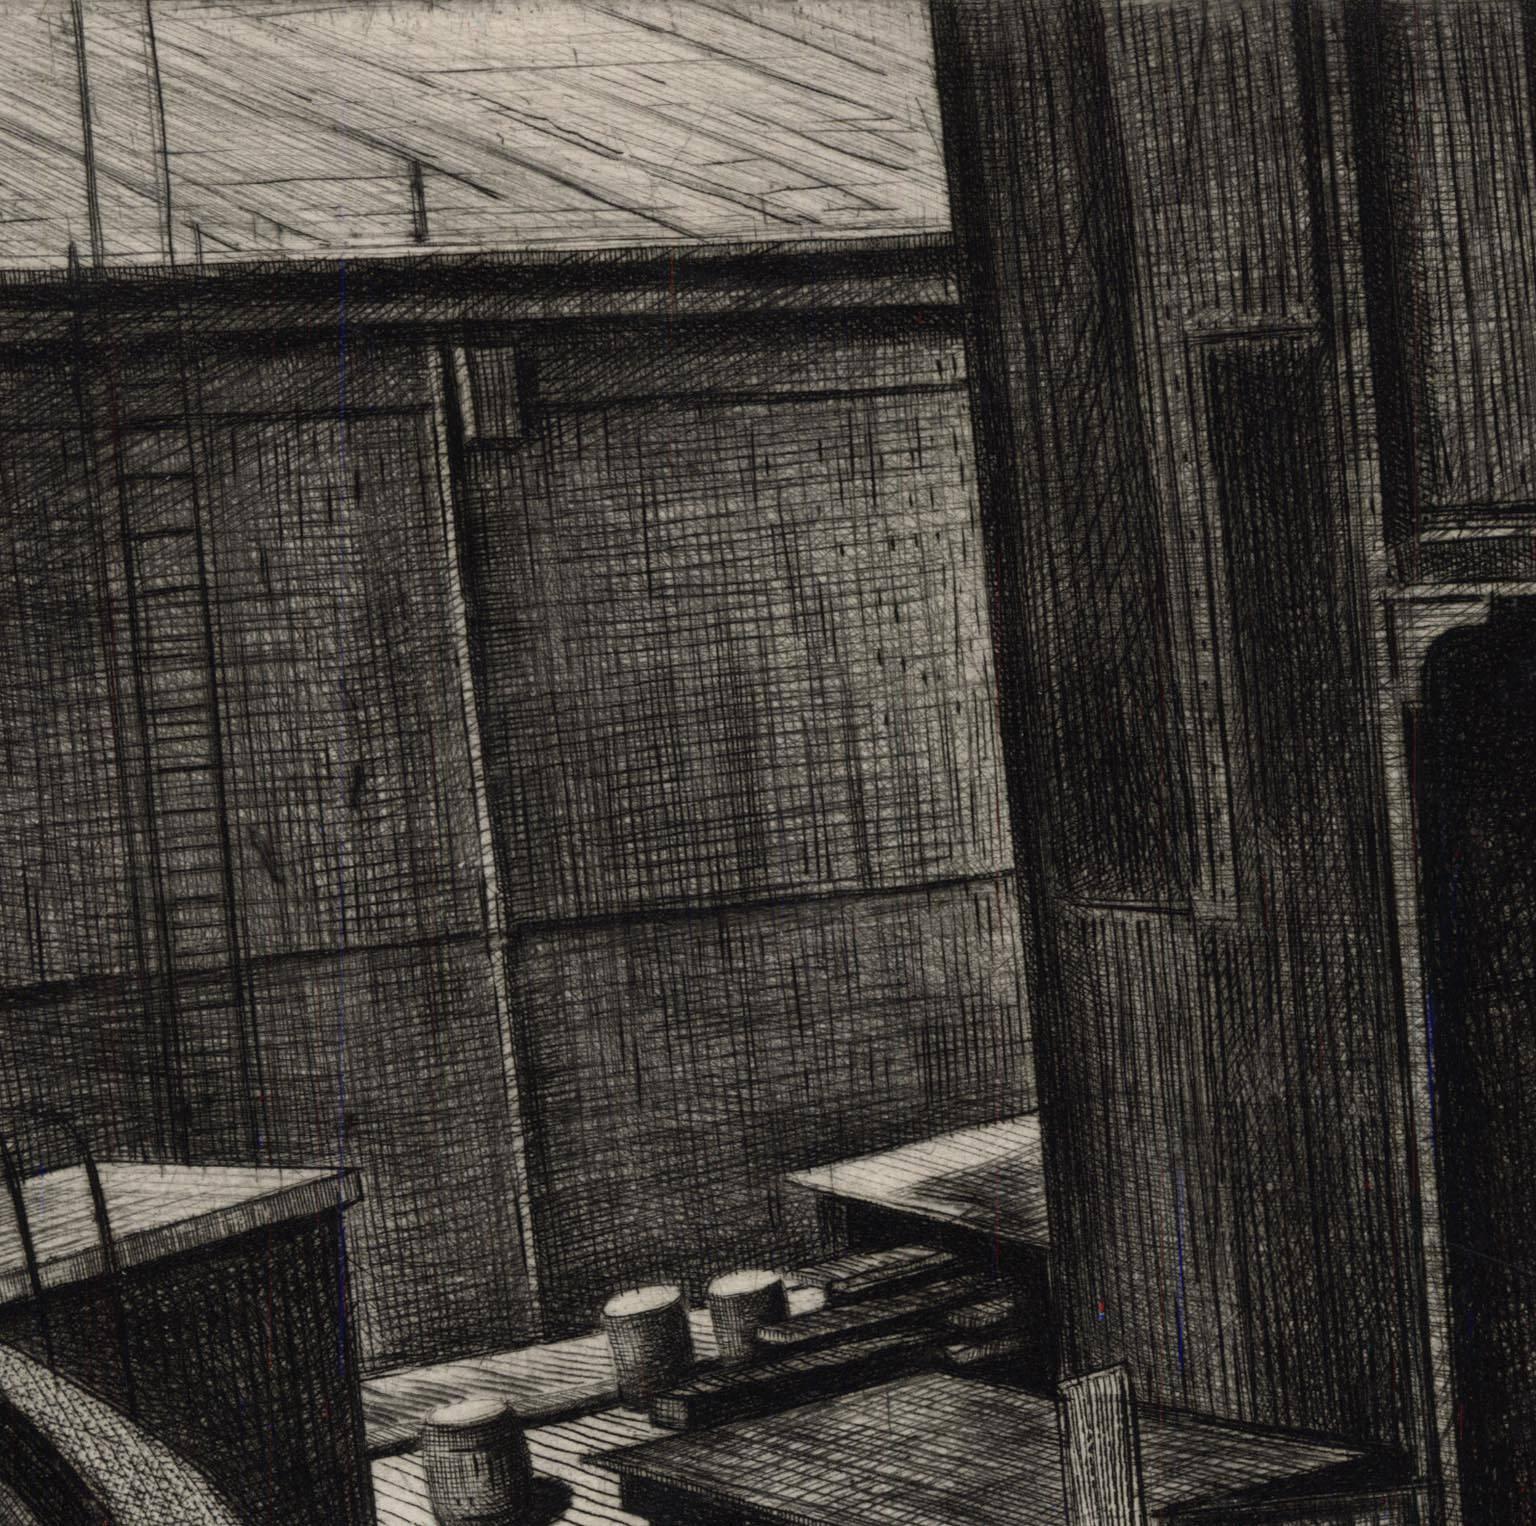 This drypoint from 1942 was printed in a very small edition.  Signed under the image in pencil at the lower right.  

Armin Landeck (1905-1984) was born in Crandon, Wisconsin, June 4, 1905.  He studied first at the University of Michigan in Ann